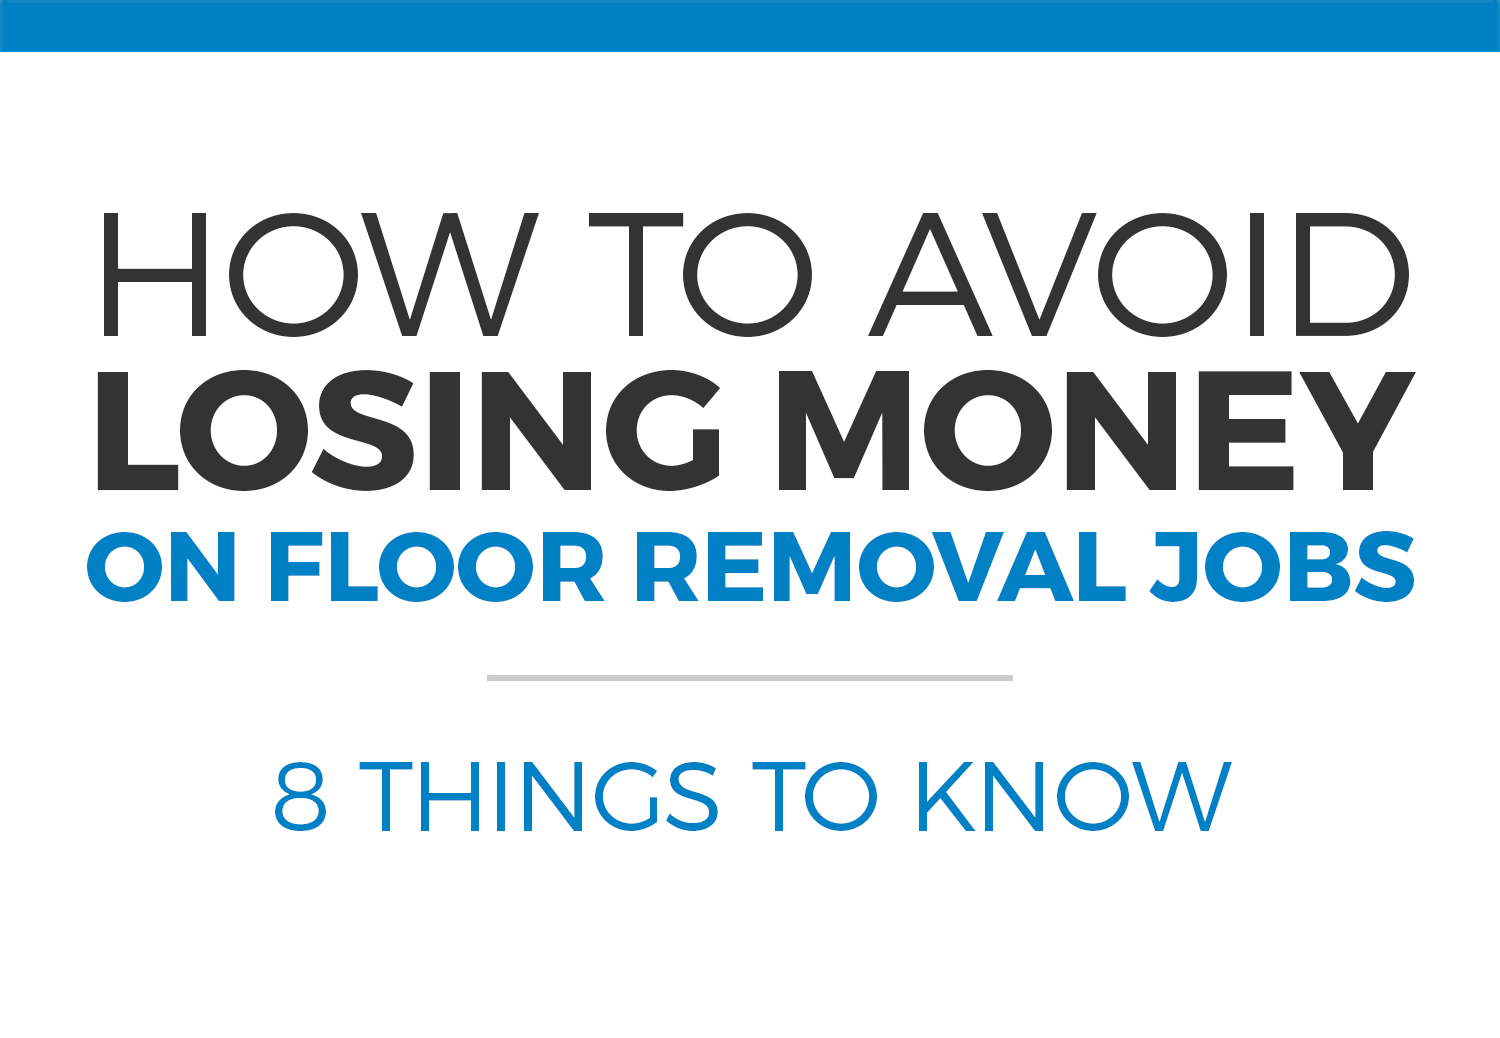 How to avoid losing money on floor removal jobs – 8 things to know